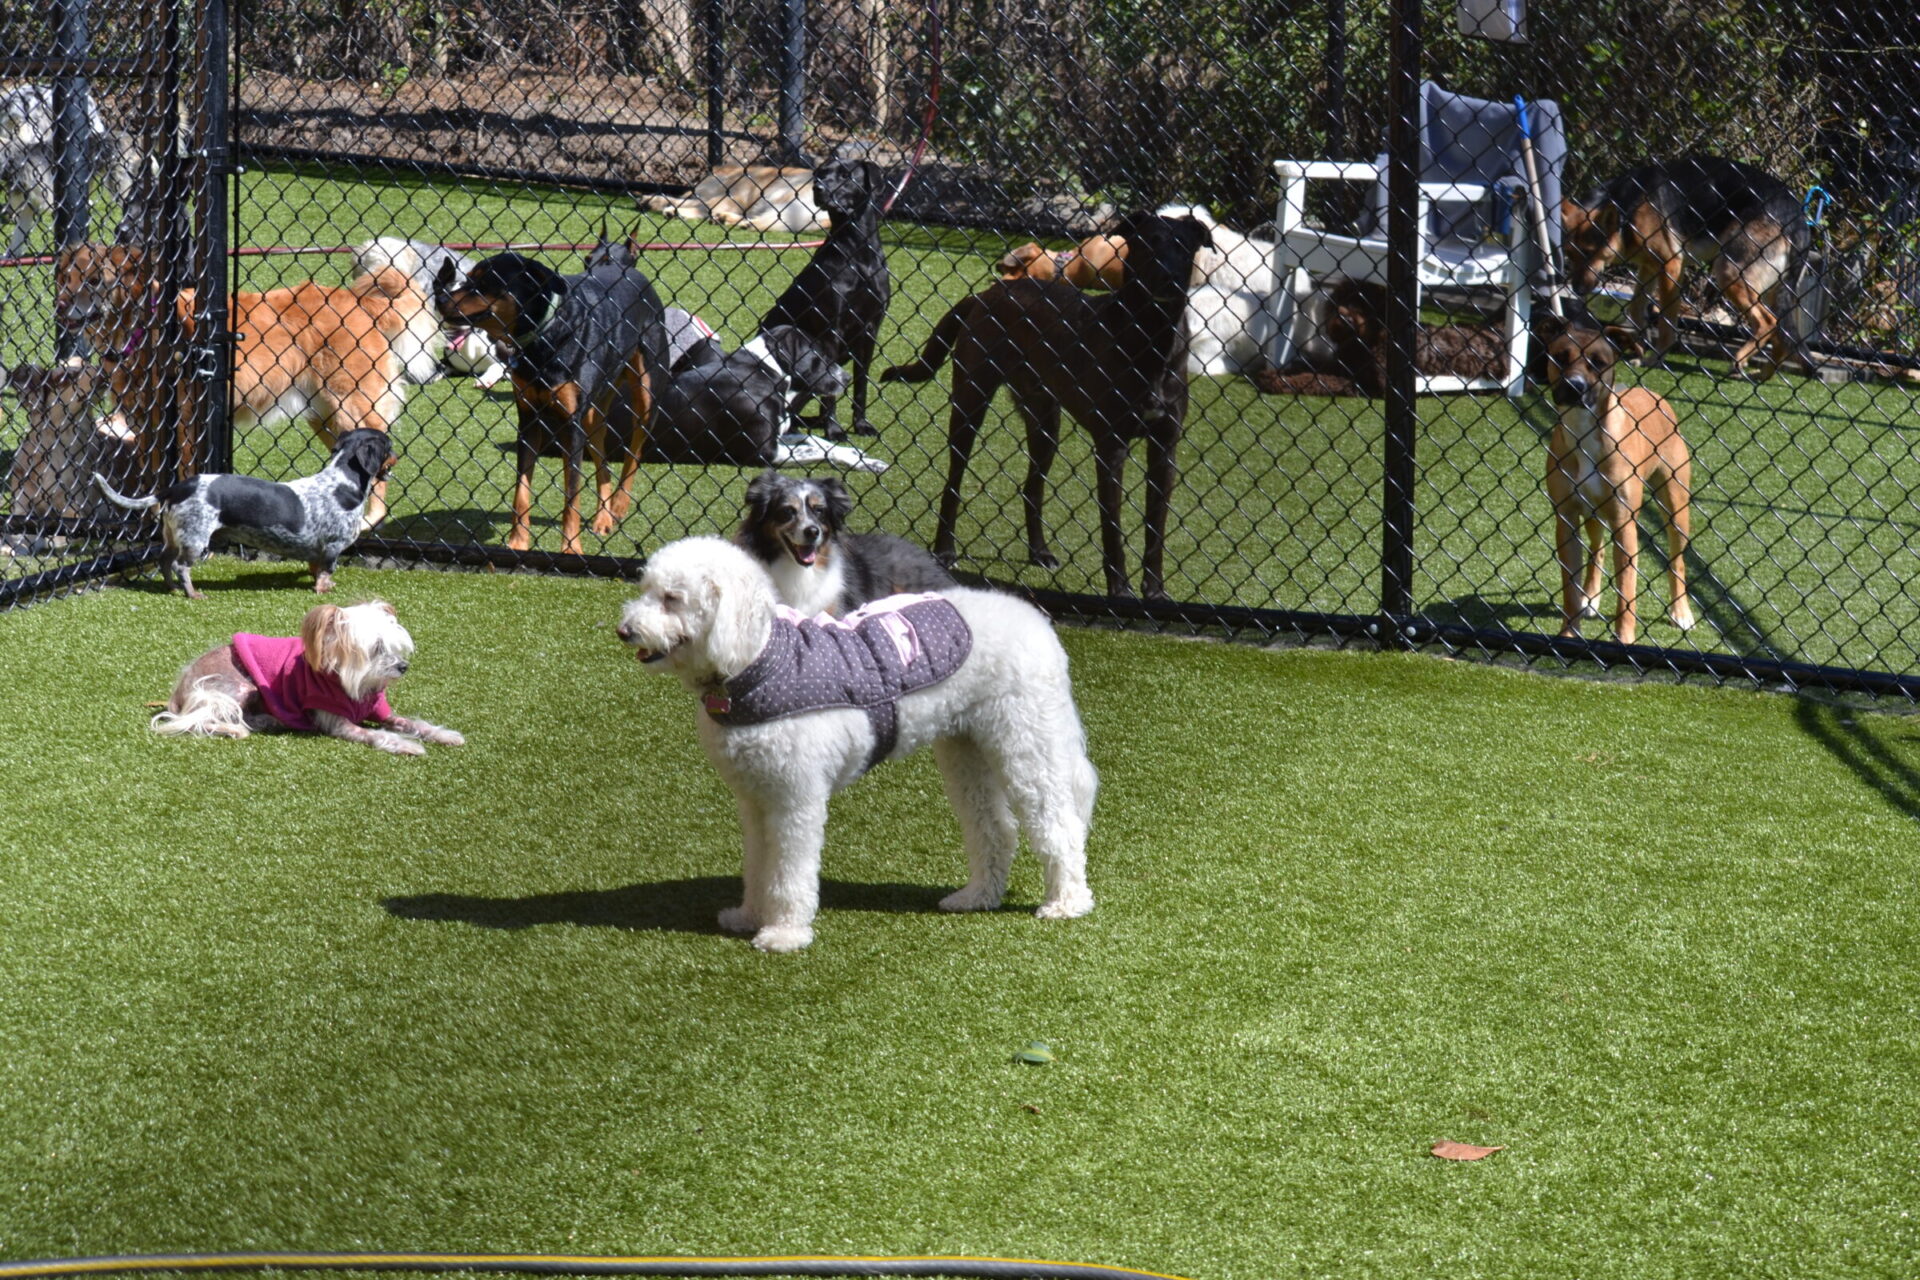 A group of various dogs enjoys outdoor playtime on artificial grass within a fenced area under a clear sky, with one dog wearing a purple sweater.